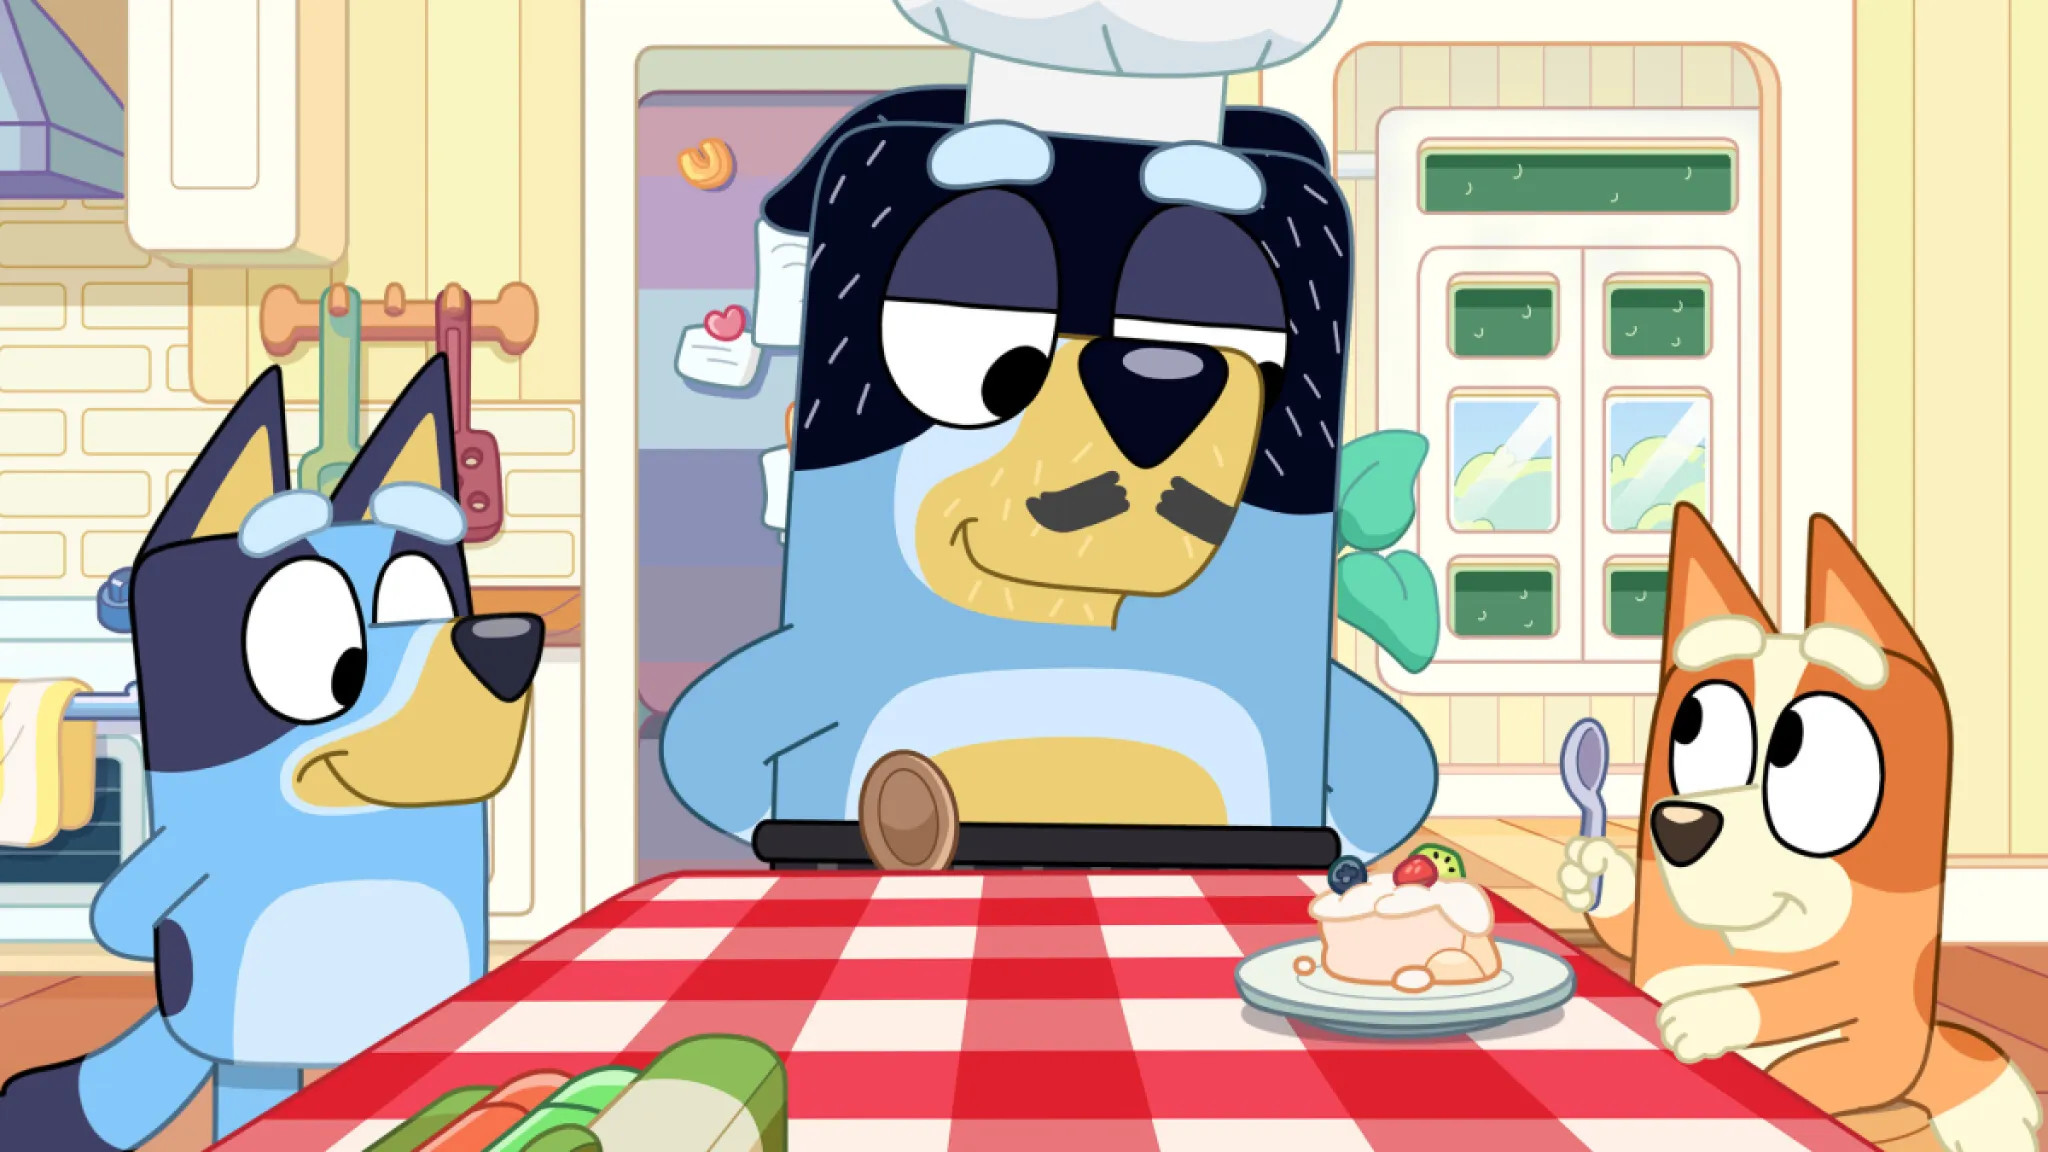 Bluey, Bandit, and Bingo gather around a table. Bandit is wearing a chef